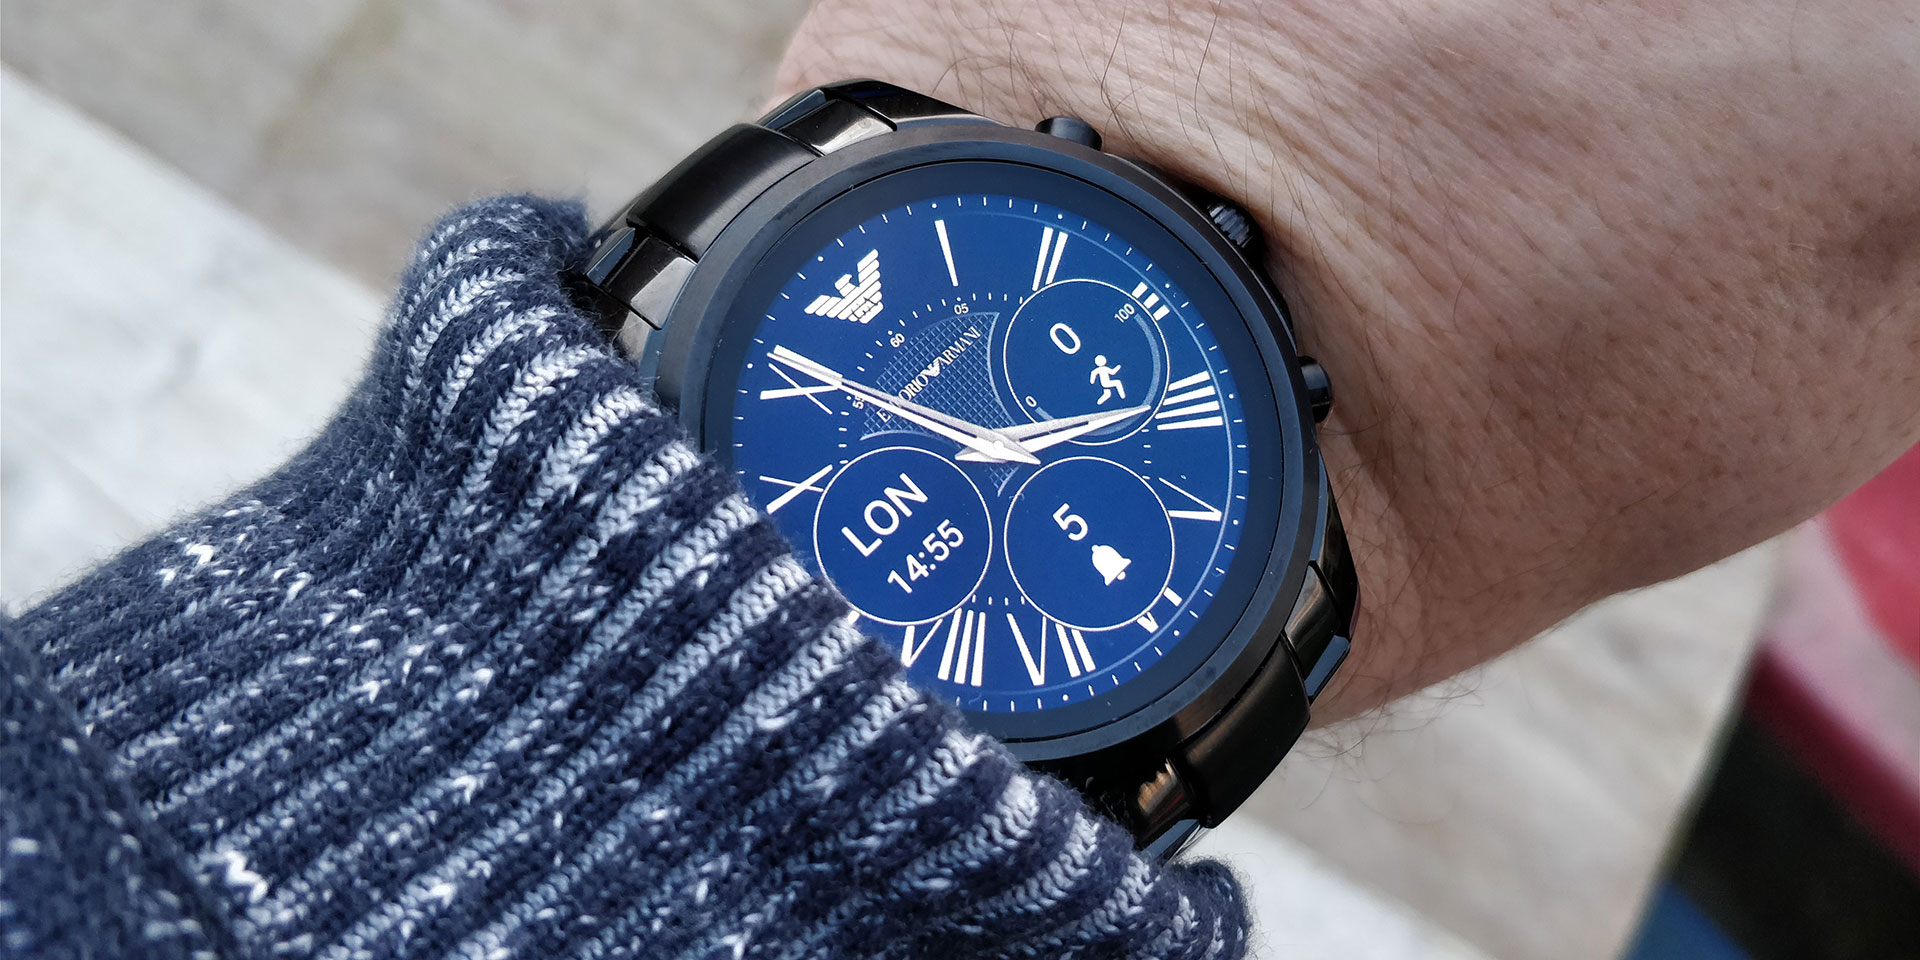 armani android wear